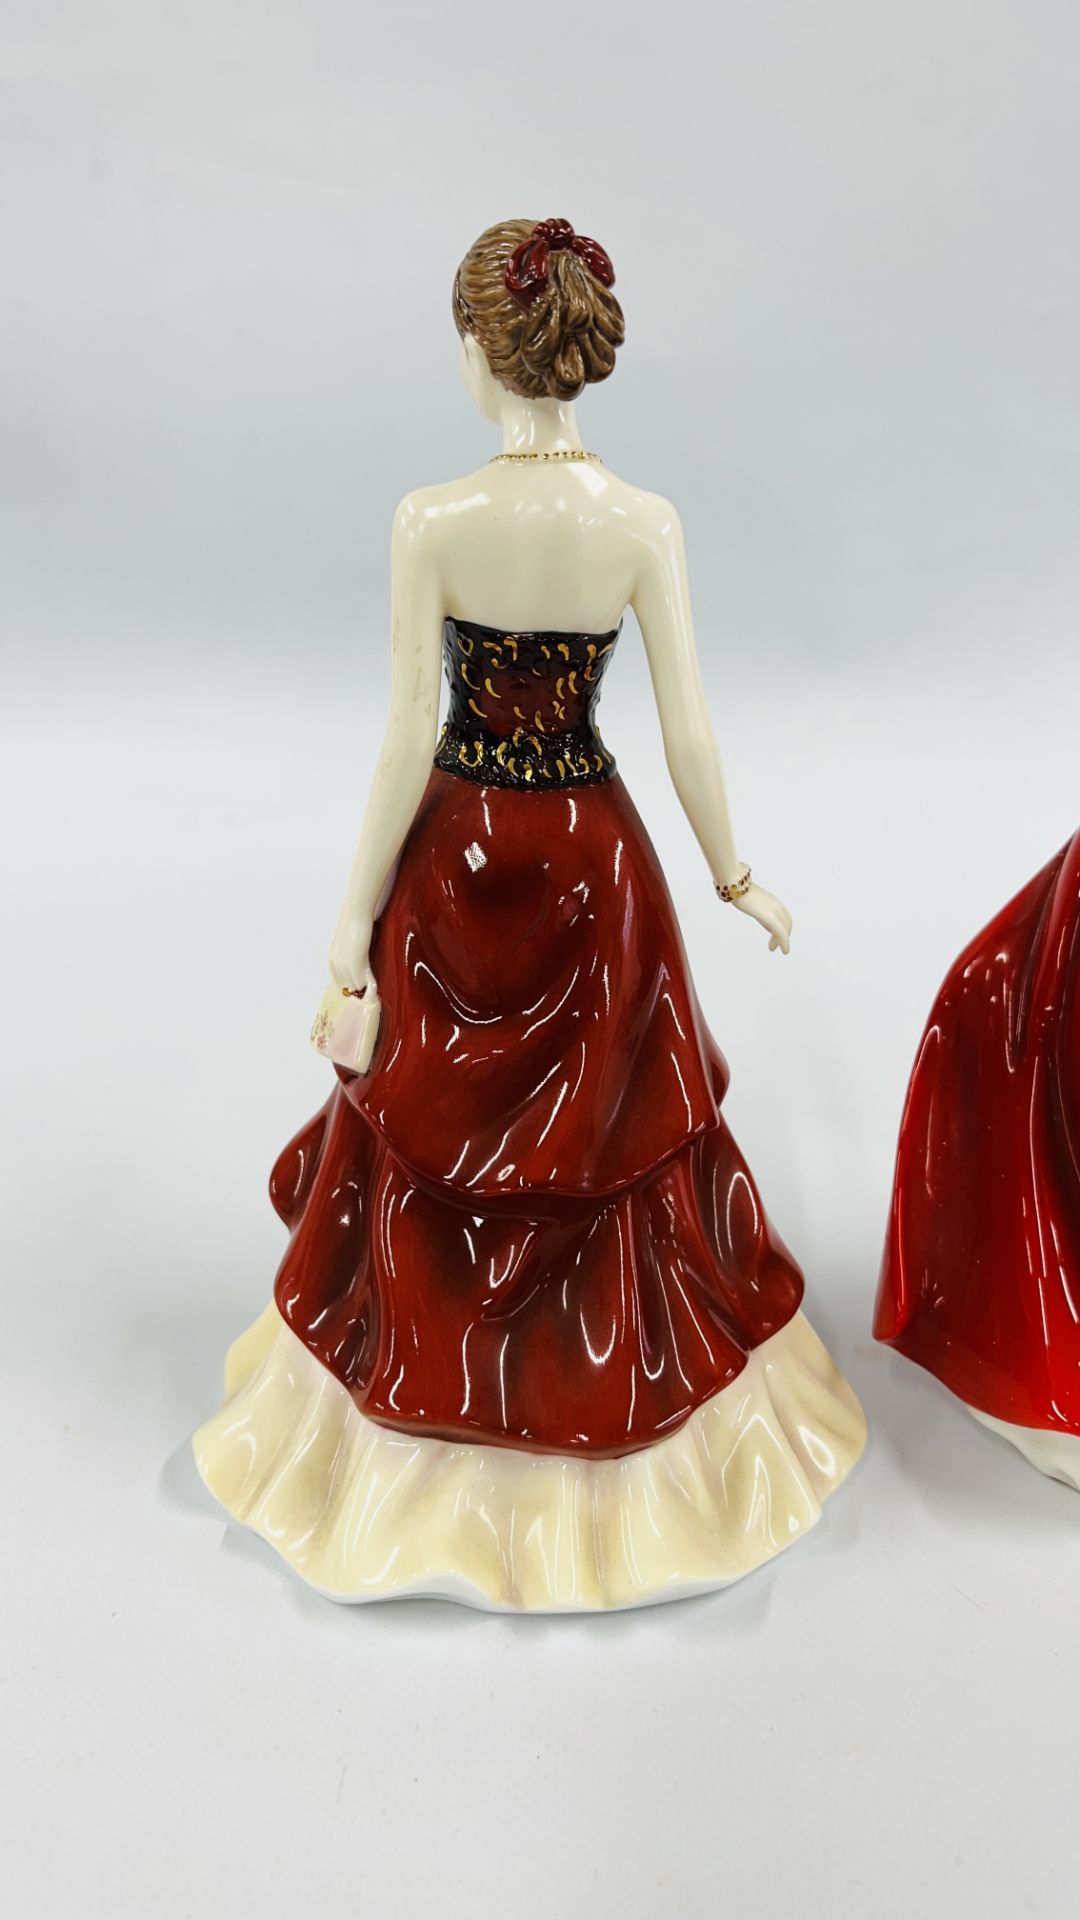 3 ROYAL DOULTON CABINET COLLECTORS FIGURINES TO INCLUDE "NATALIE" HN 5012, LIMITED EDITION 1419/15, - Image 5 of 10